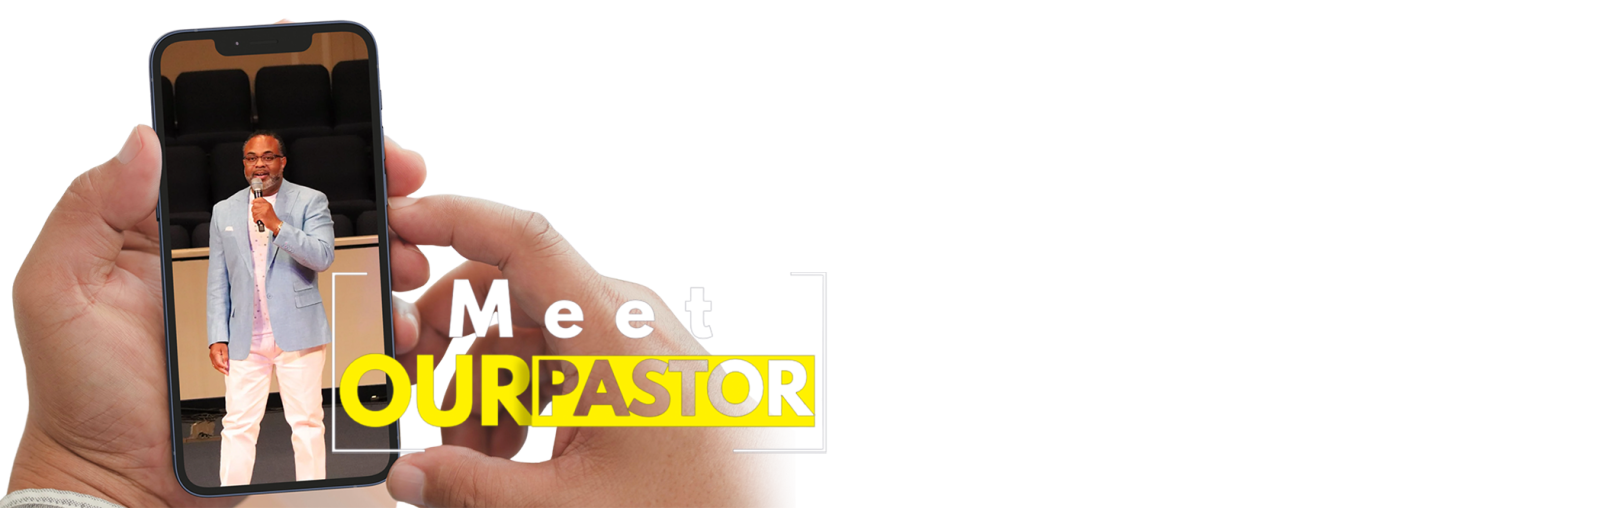 meet-our-pastor